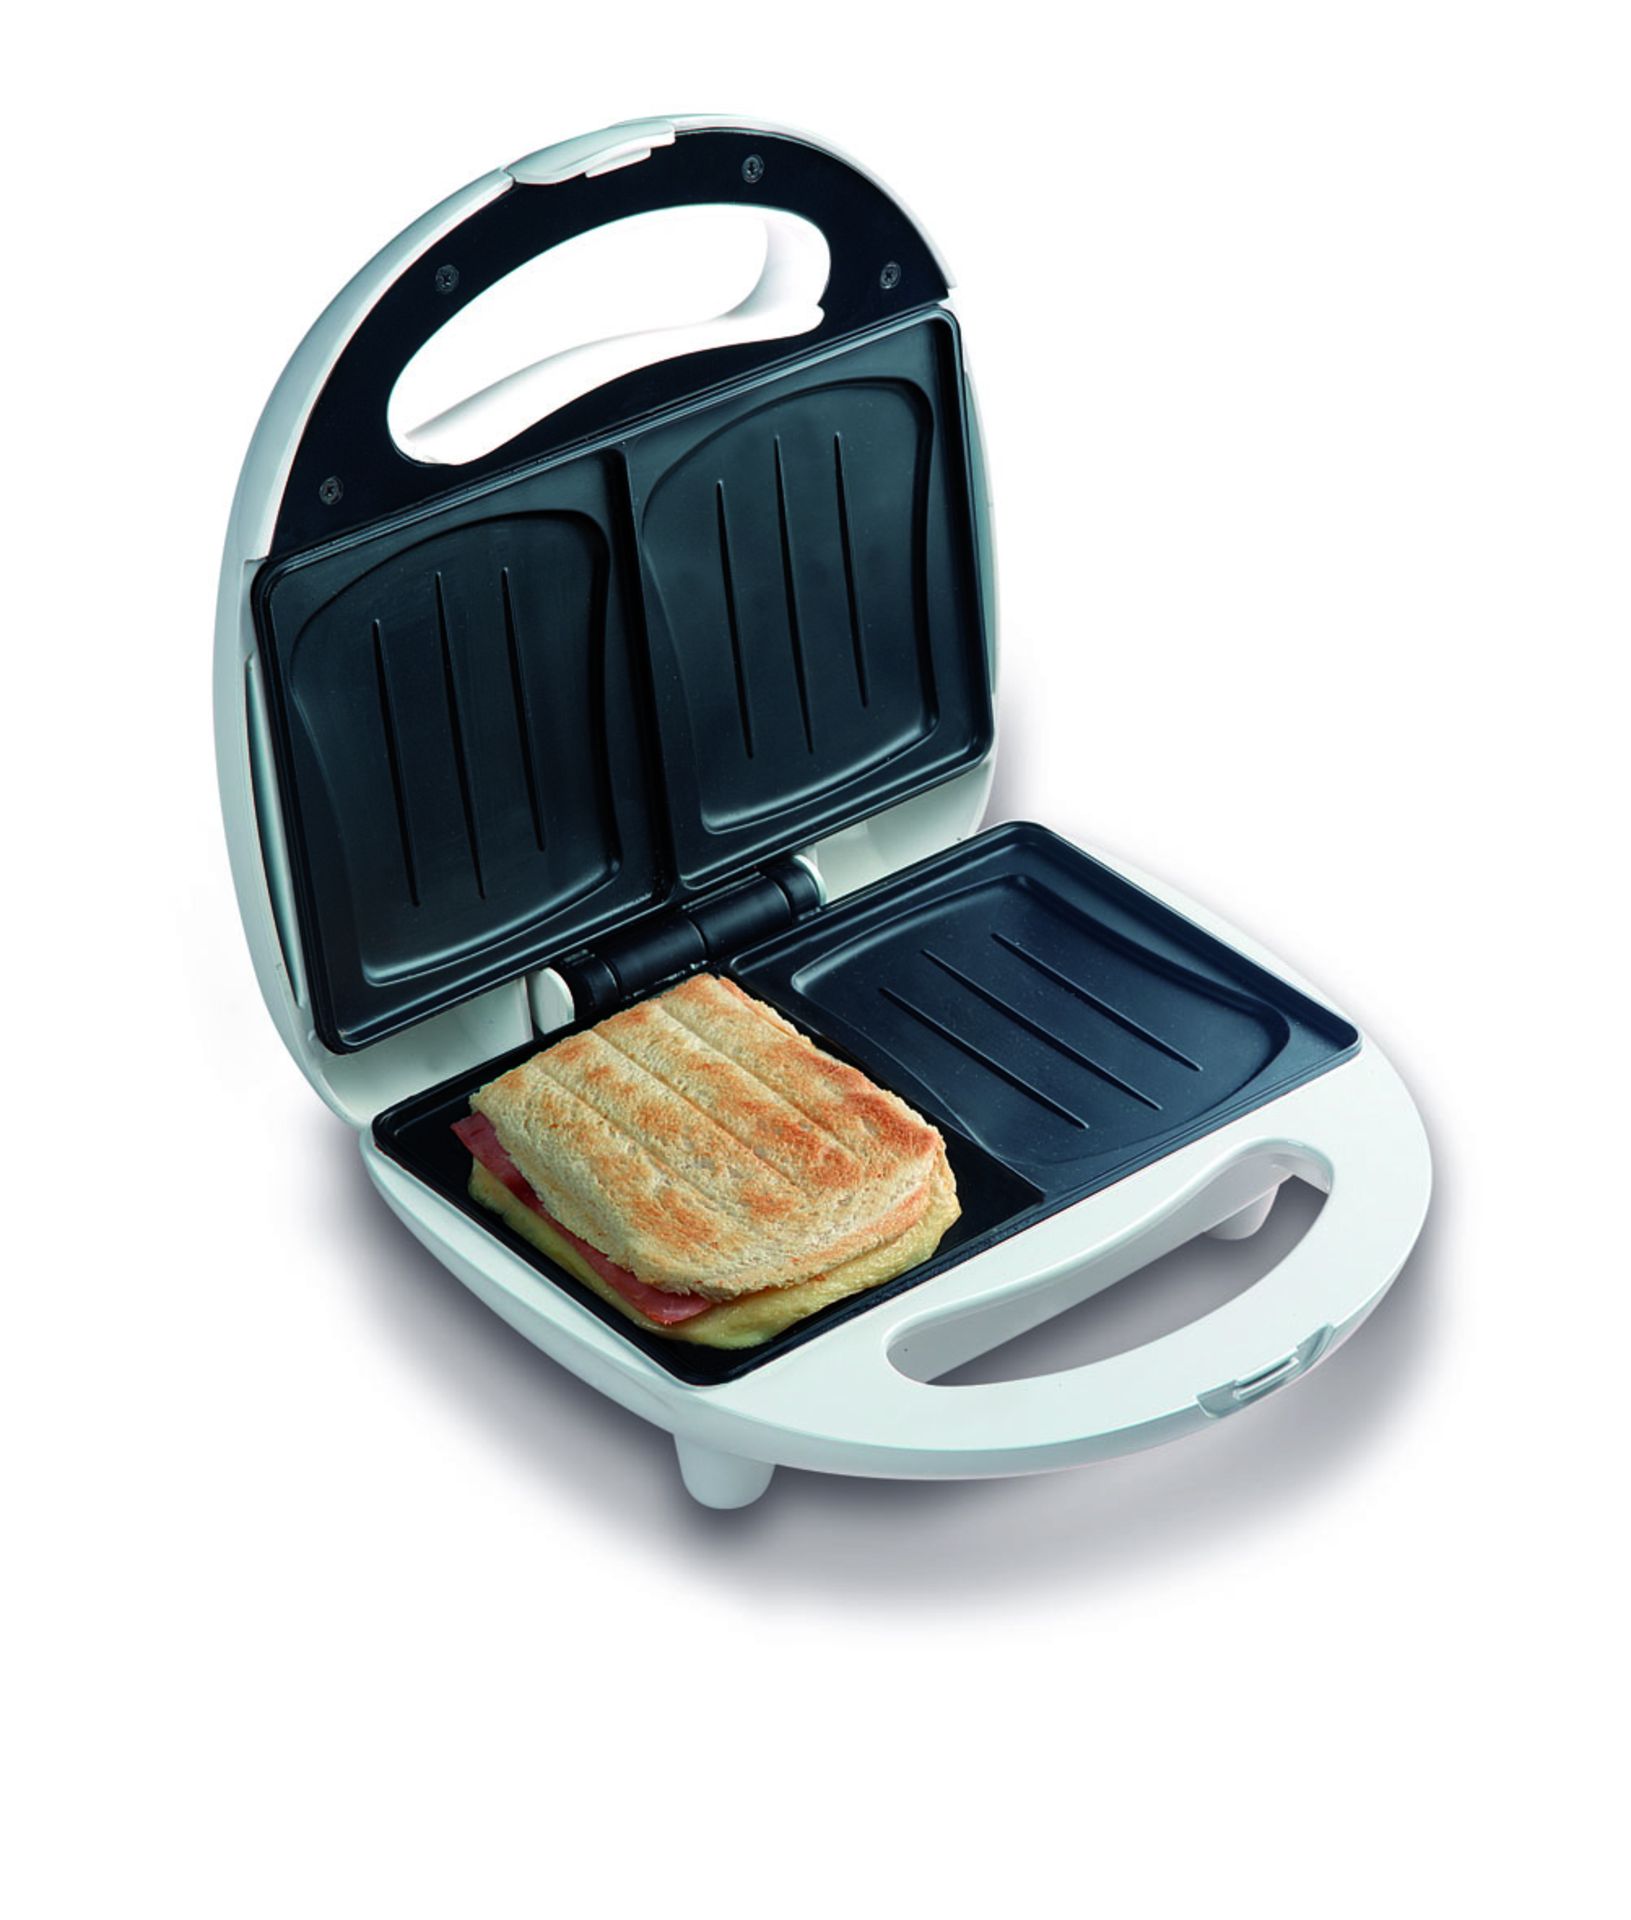 10 x DOMO Twin Sandwich toasters Pannini makers 700W RRP £ 50 total £ 500 - Image 4 of 4